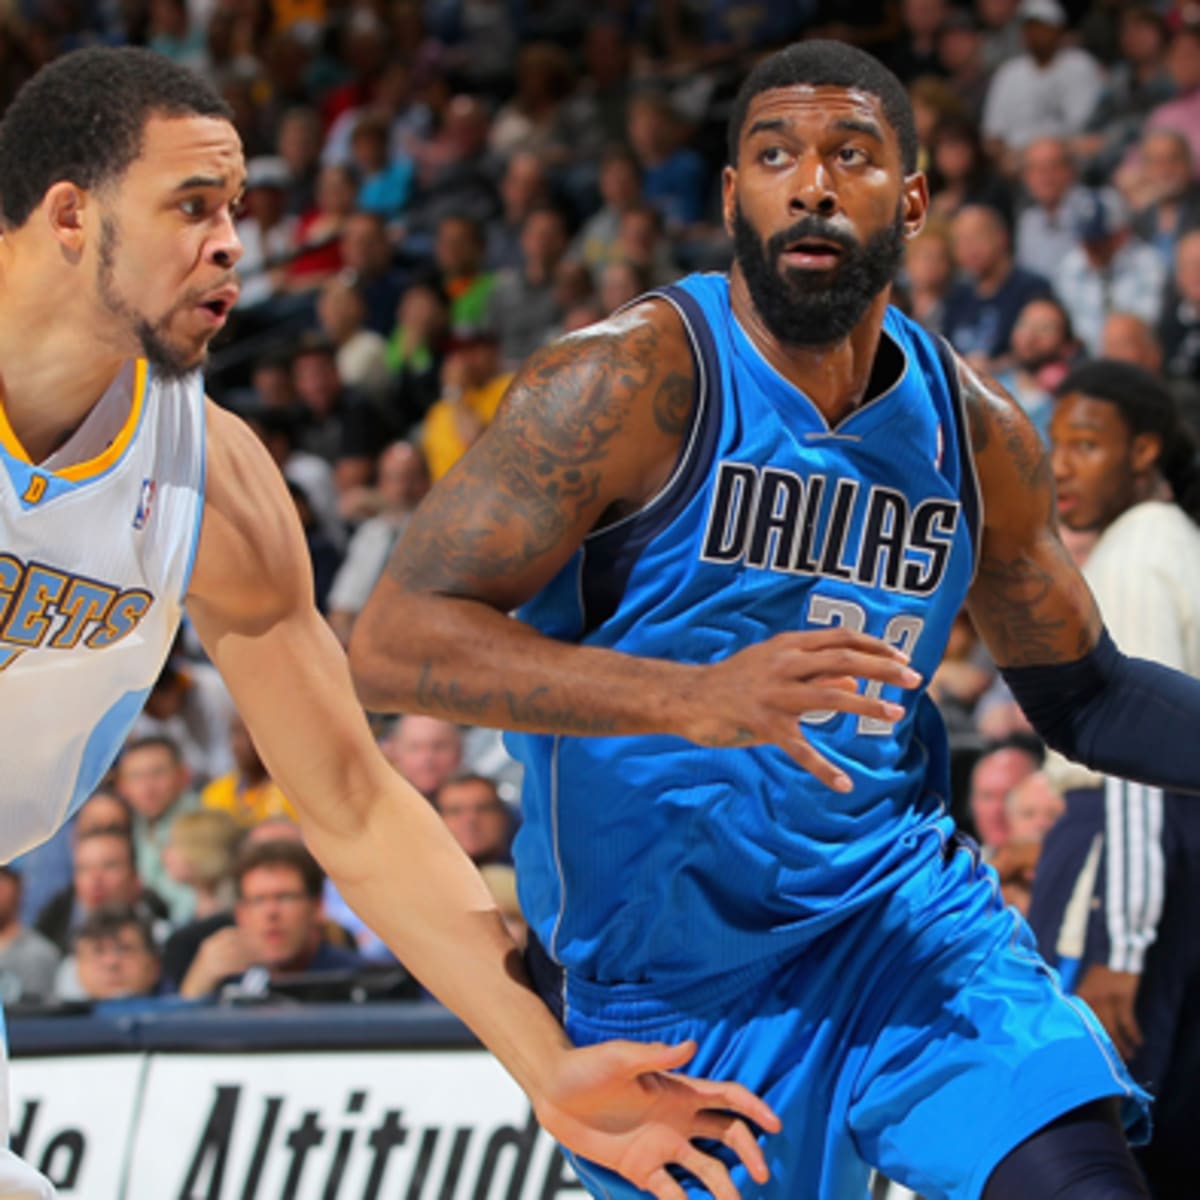 Rookie Watch: Memphis Grizzlies' O.J. Mayo the new No. 1 - ESPN